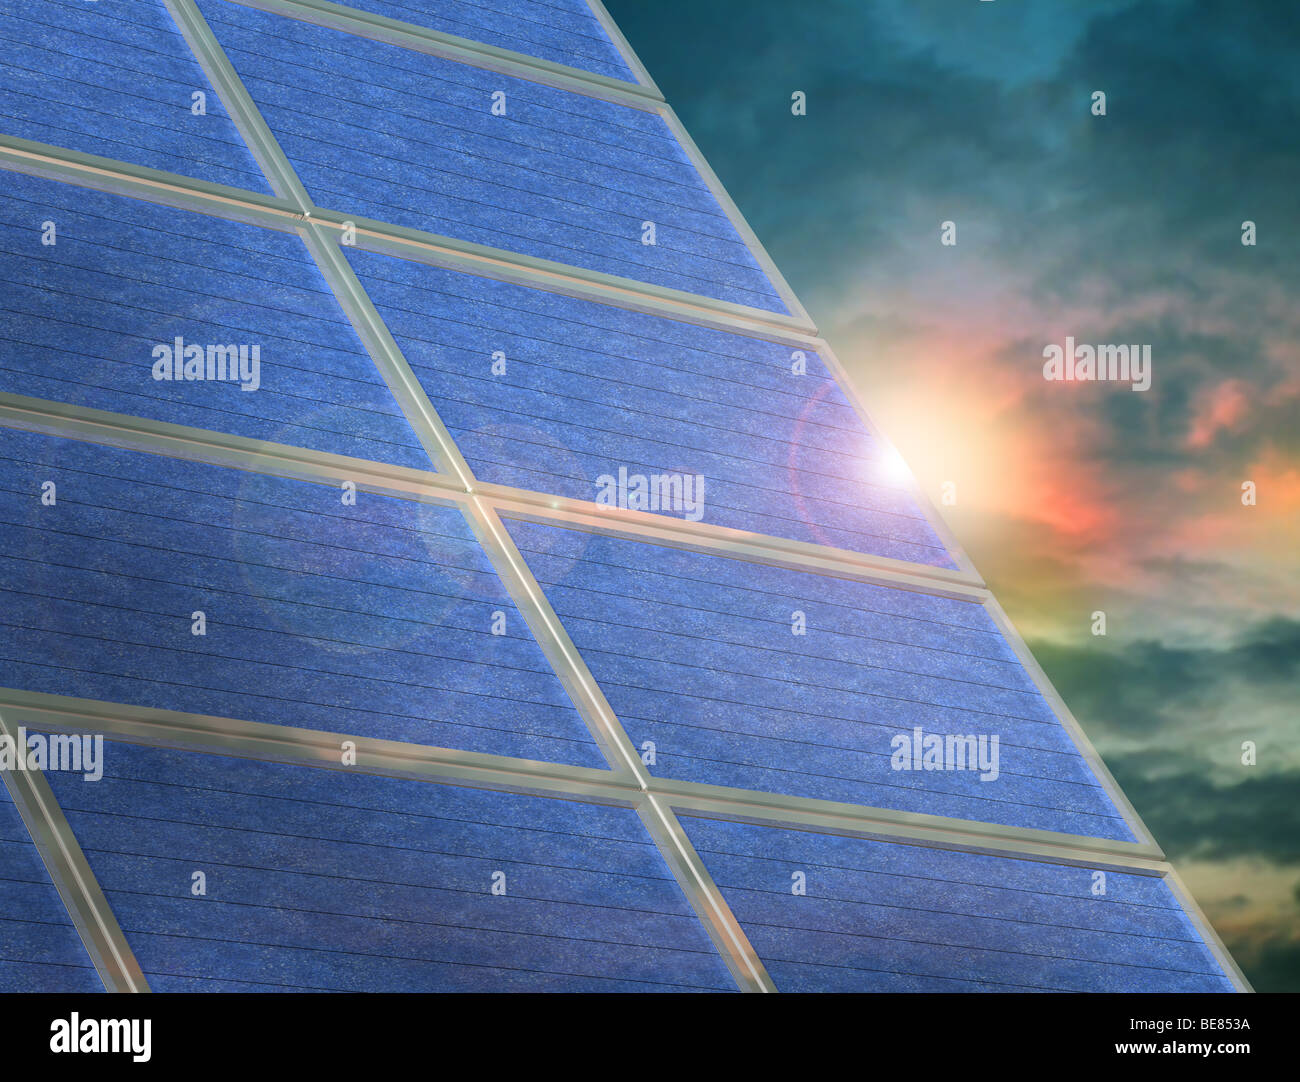 Illustration of a solar panel array at sunset Stock Photo